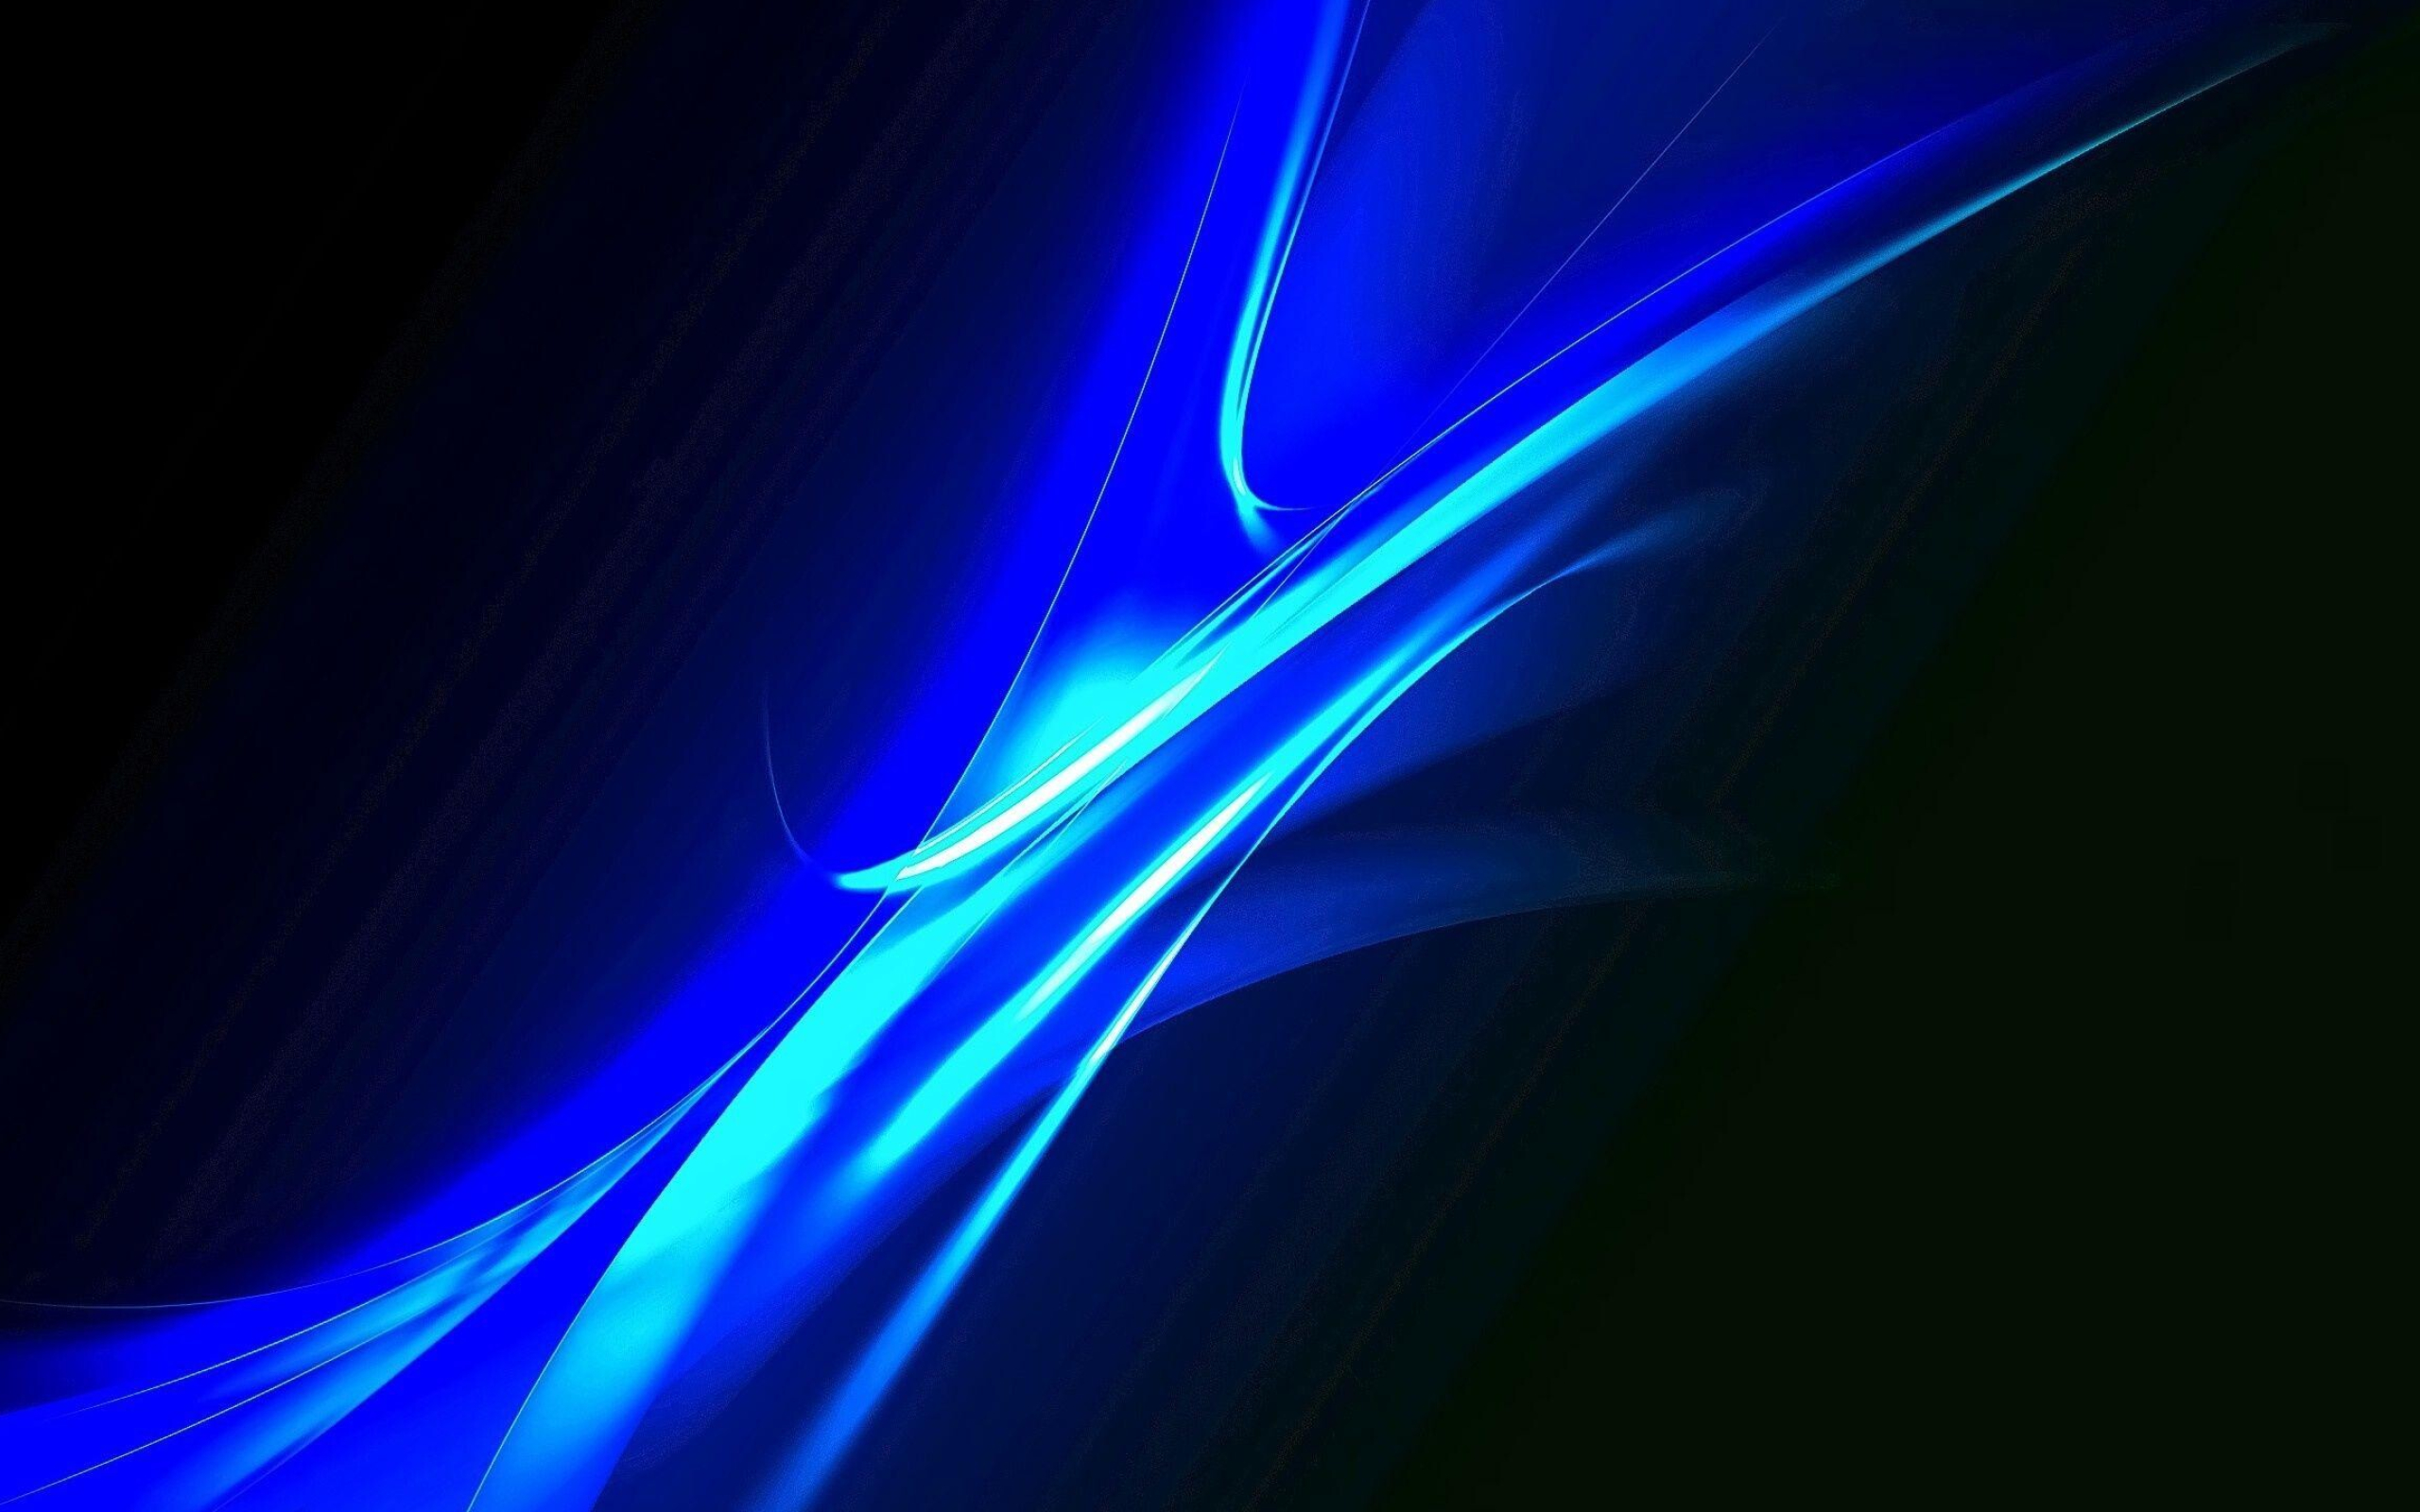 Glow in the Dark: Neon flashes, Glowing stokes, Abstract, Waves of lights. 2560x1600 HD Wallpaper.